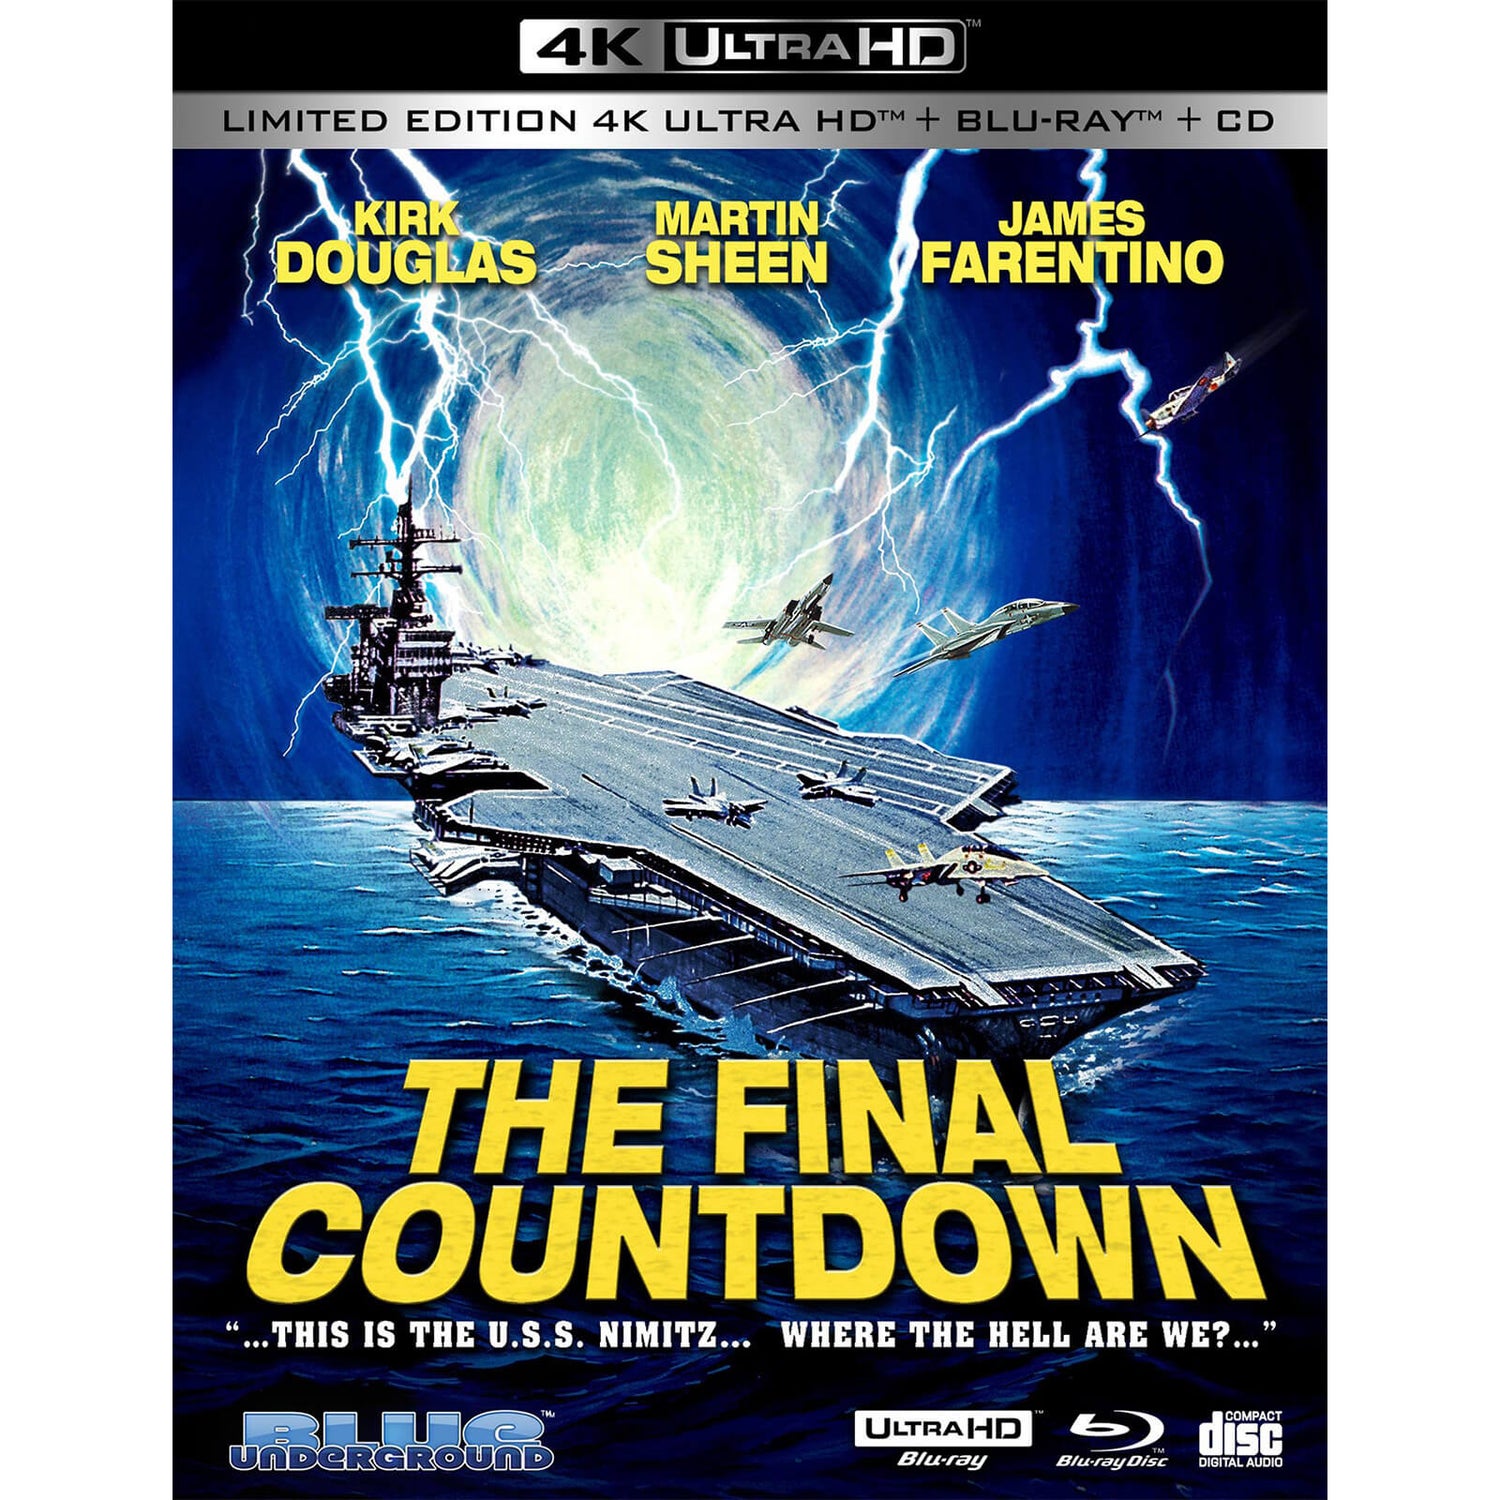 The Final Countdown - 4K Ultra HD (Includes Blu-ray and CD)